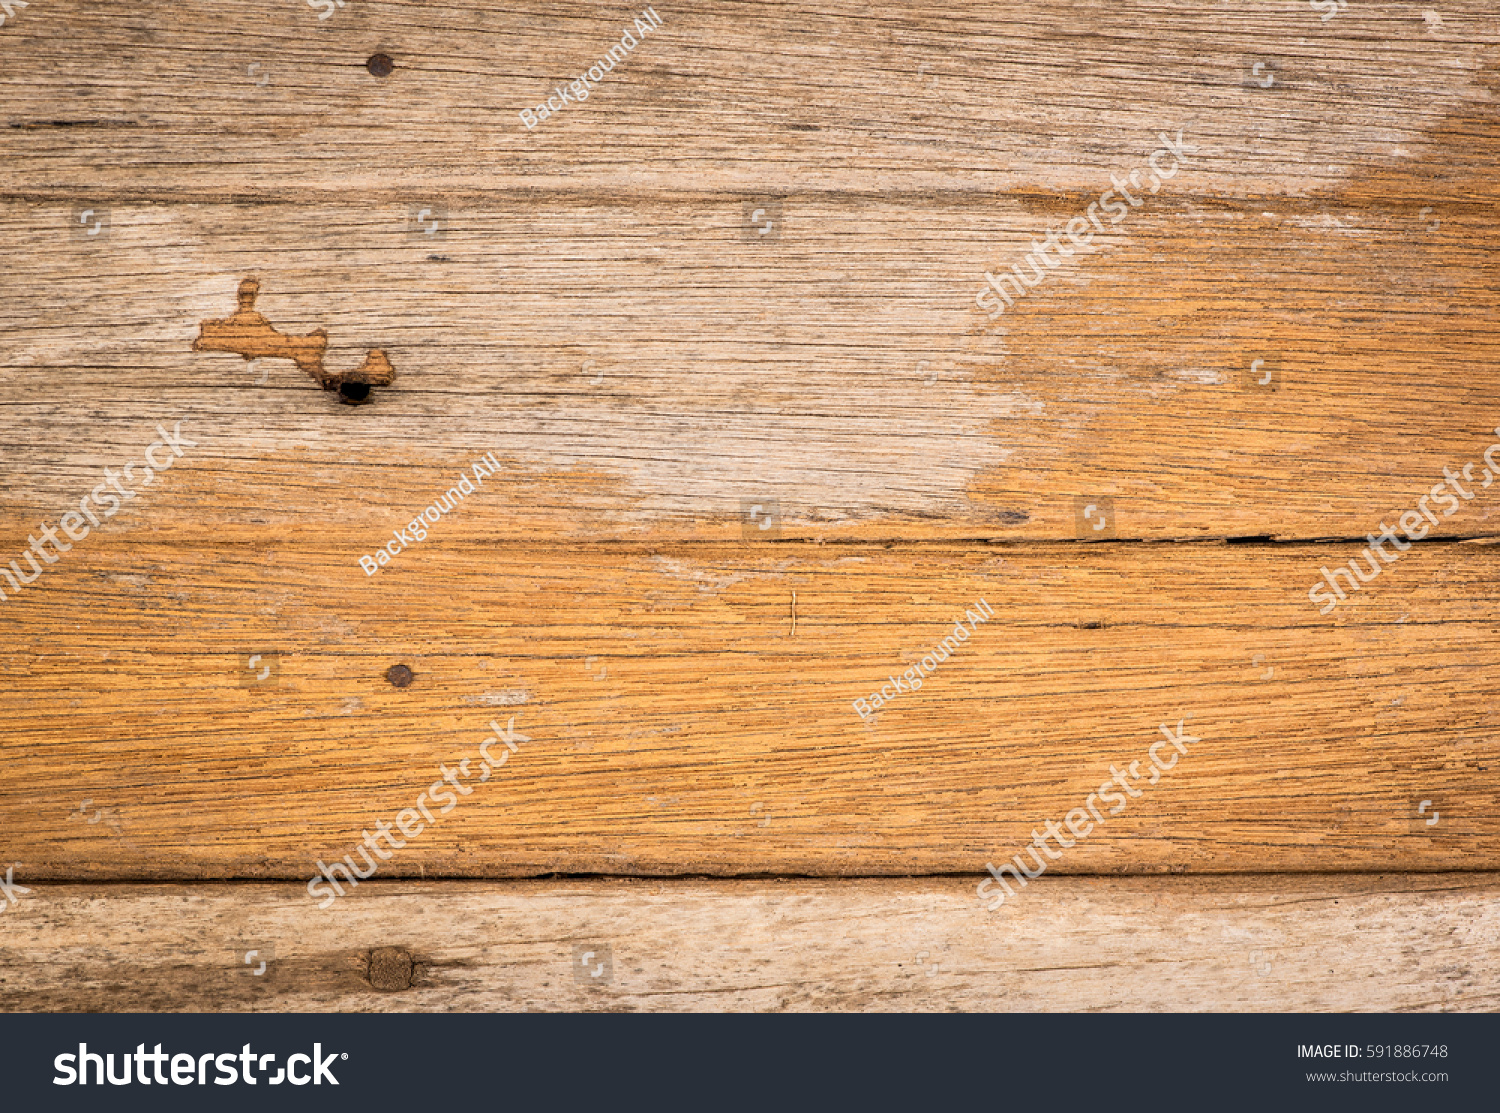 Old brown wooden boards, background #591886748